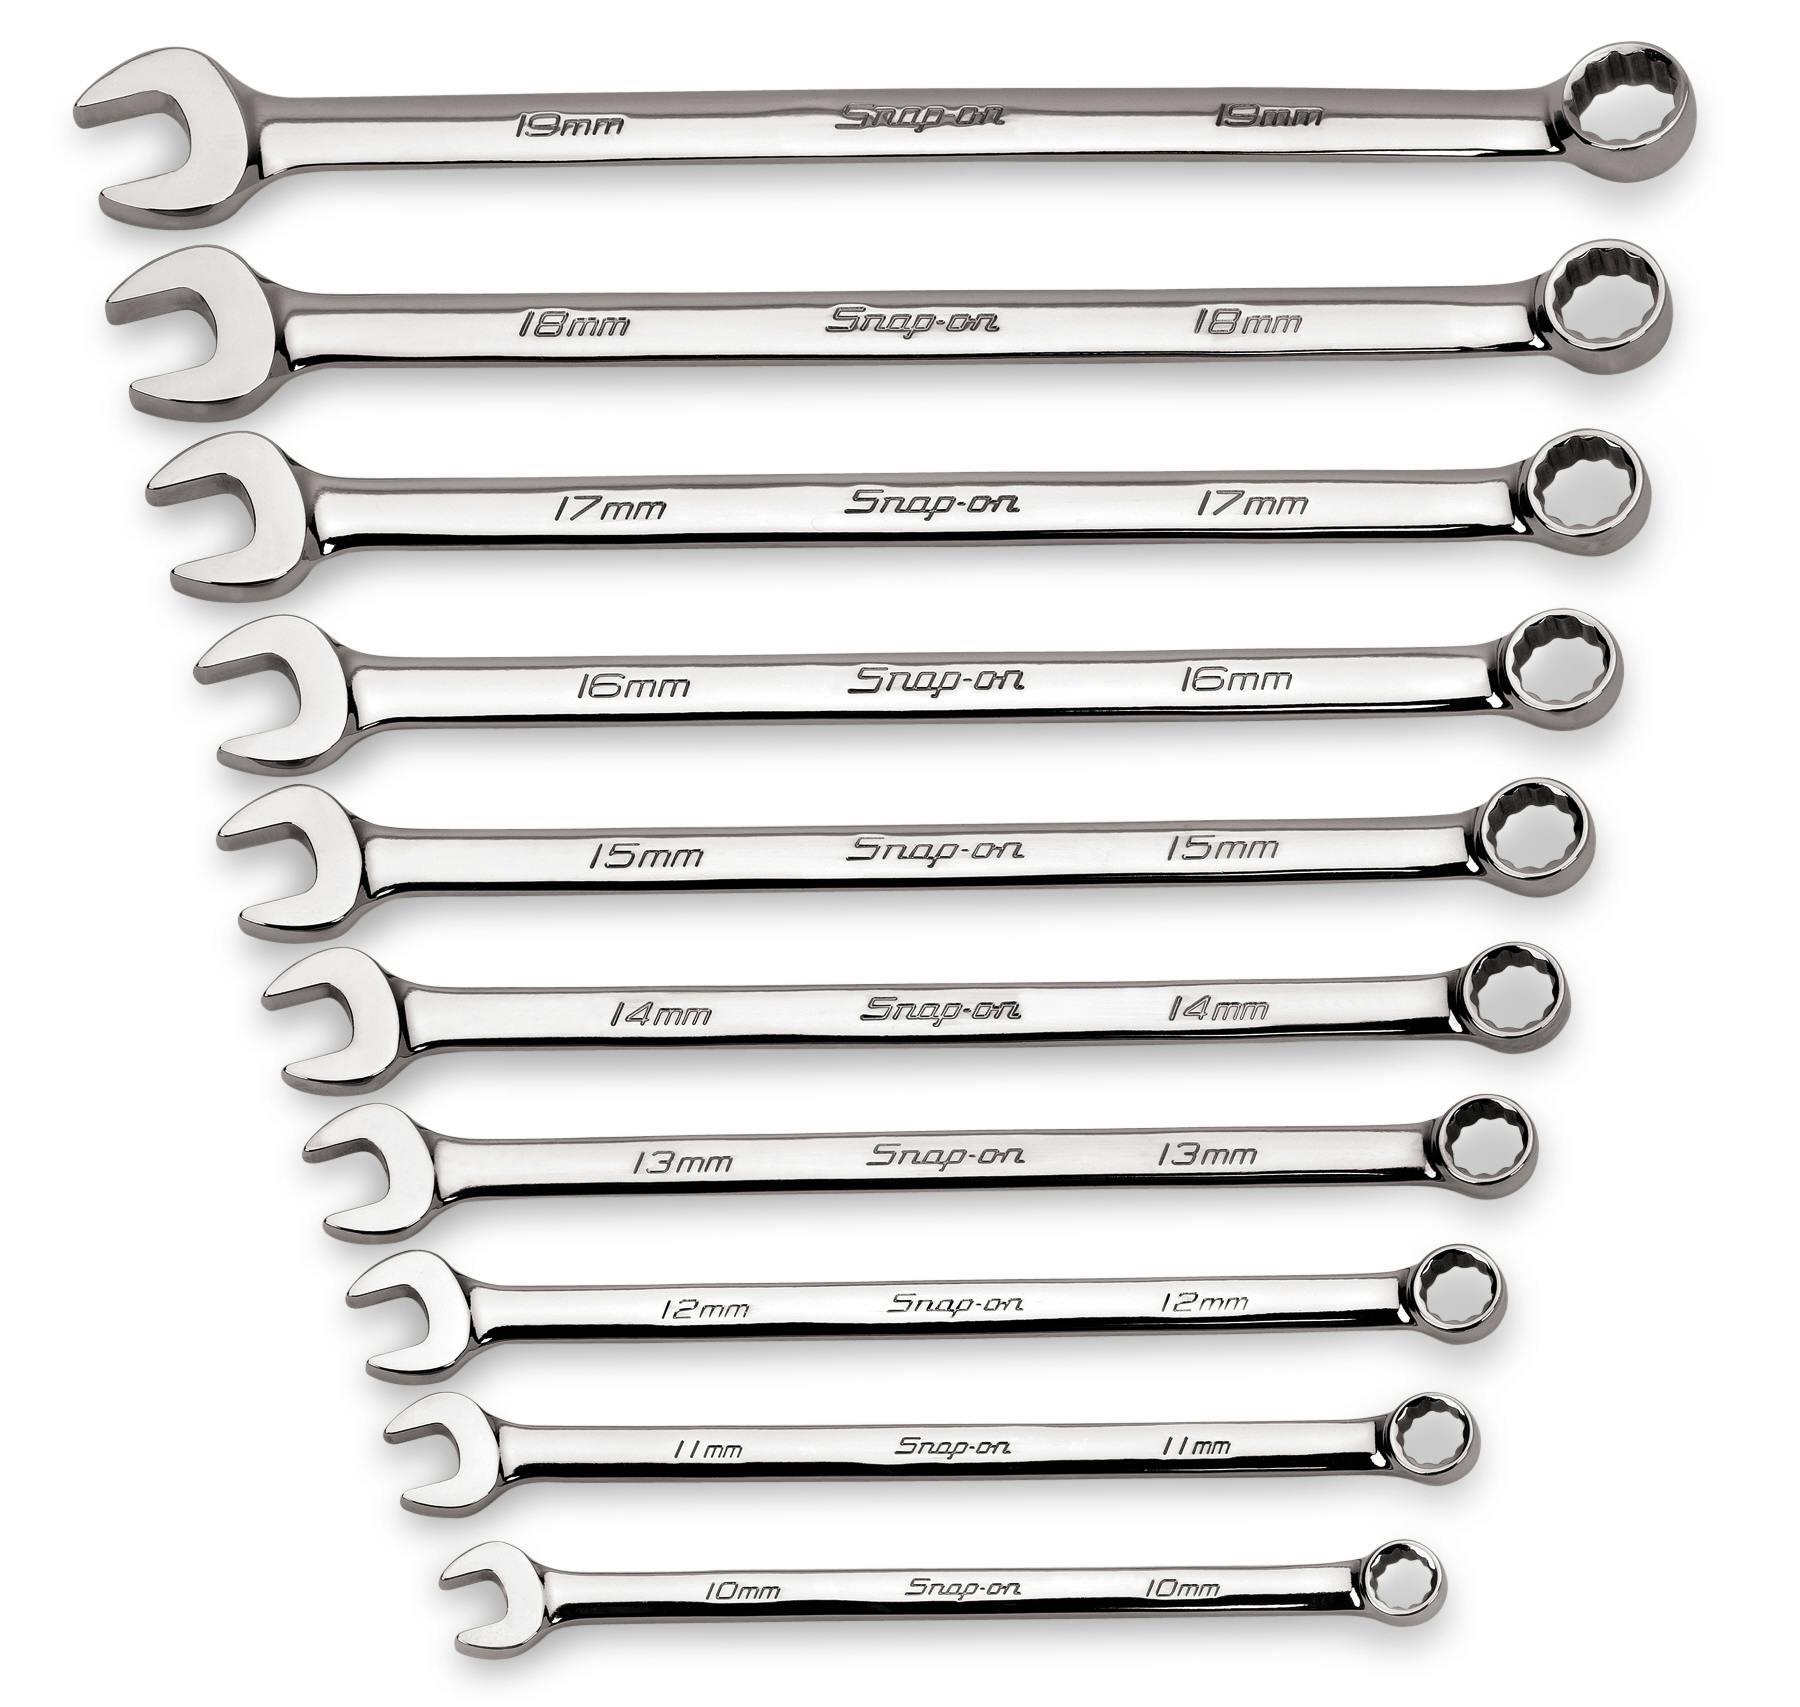 Blue Point Metric Combination Wrench Spanner Set 10mm 19mm sold by Snap On NEW 